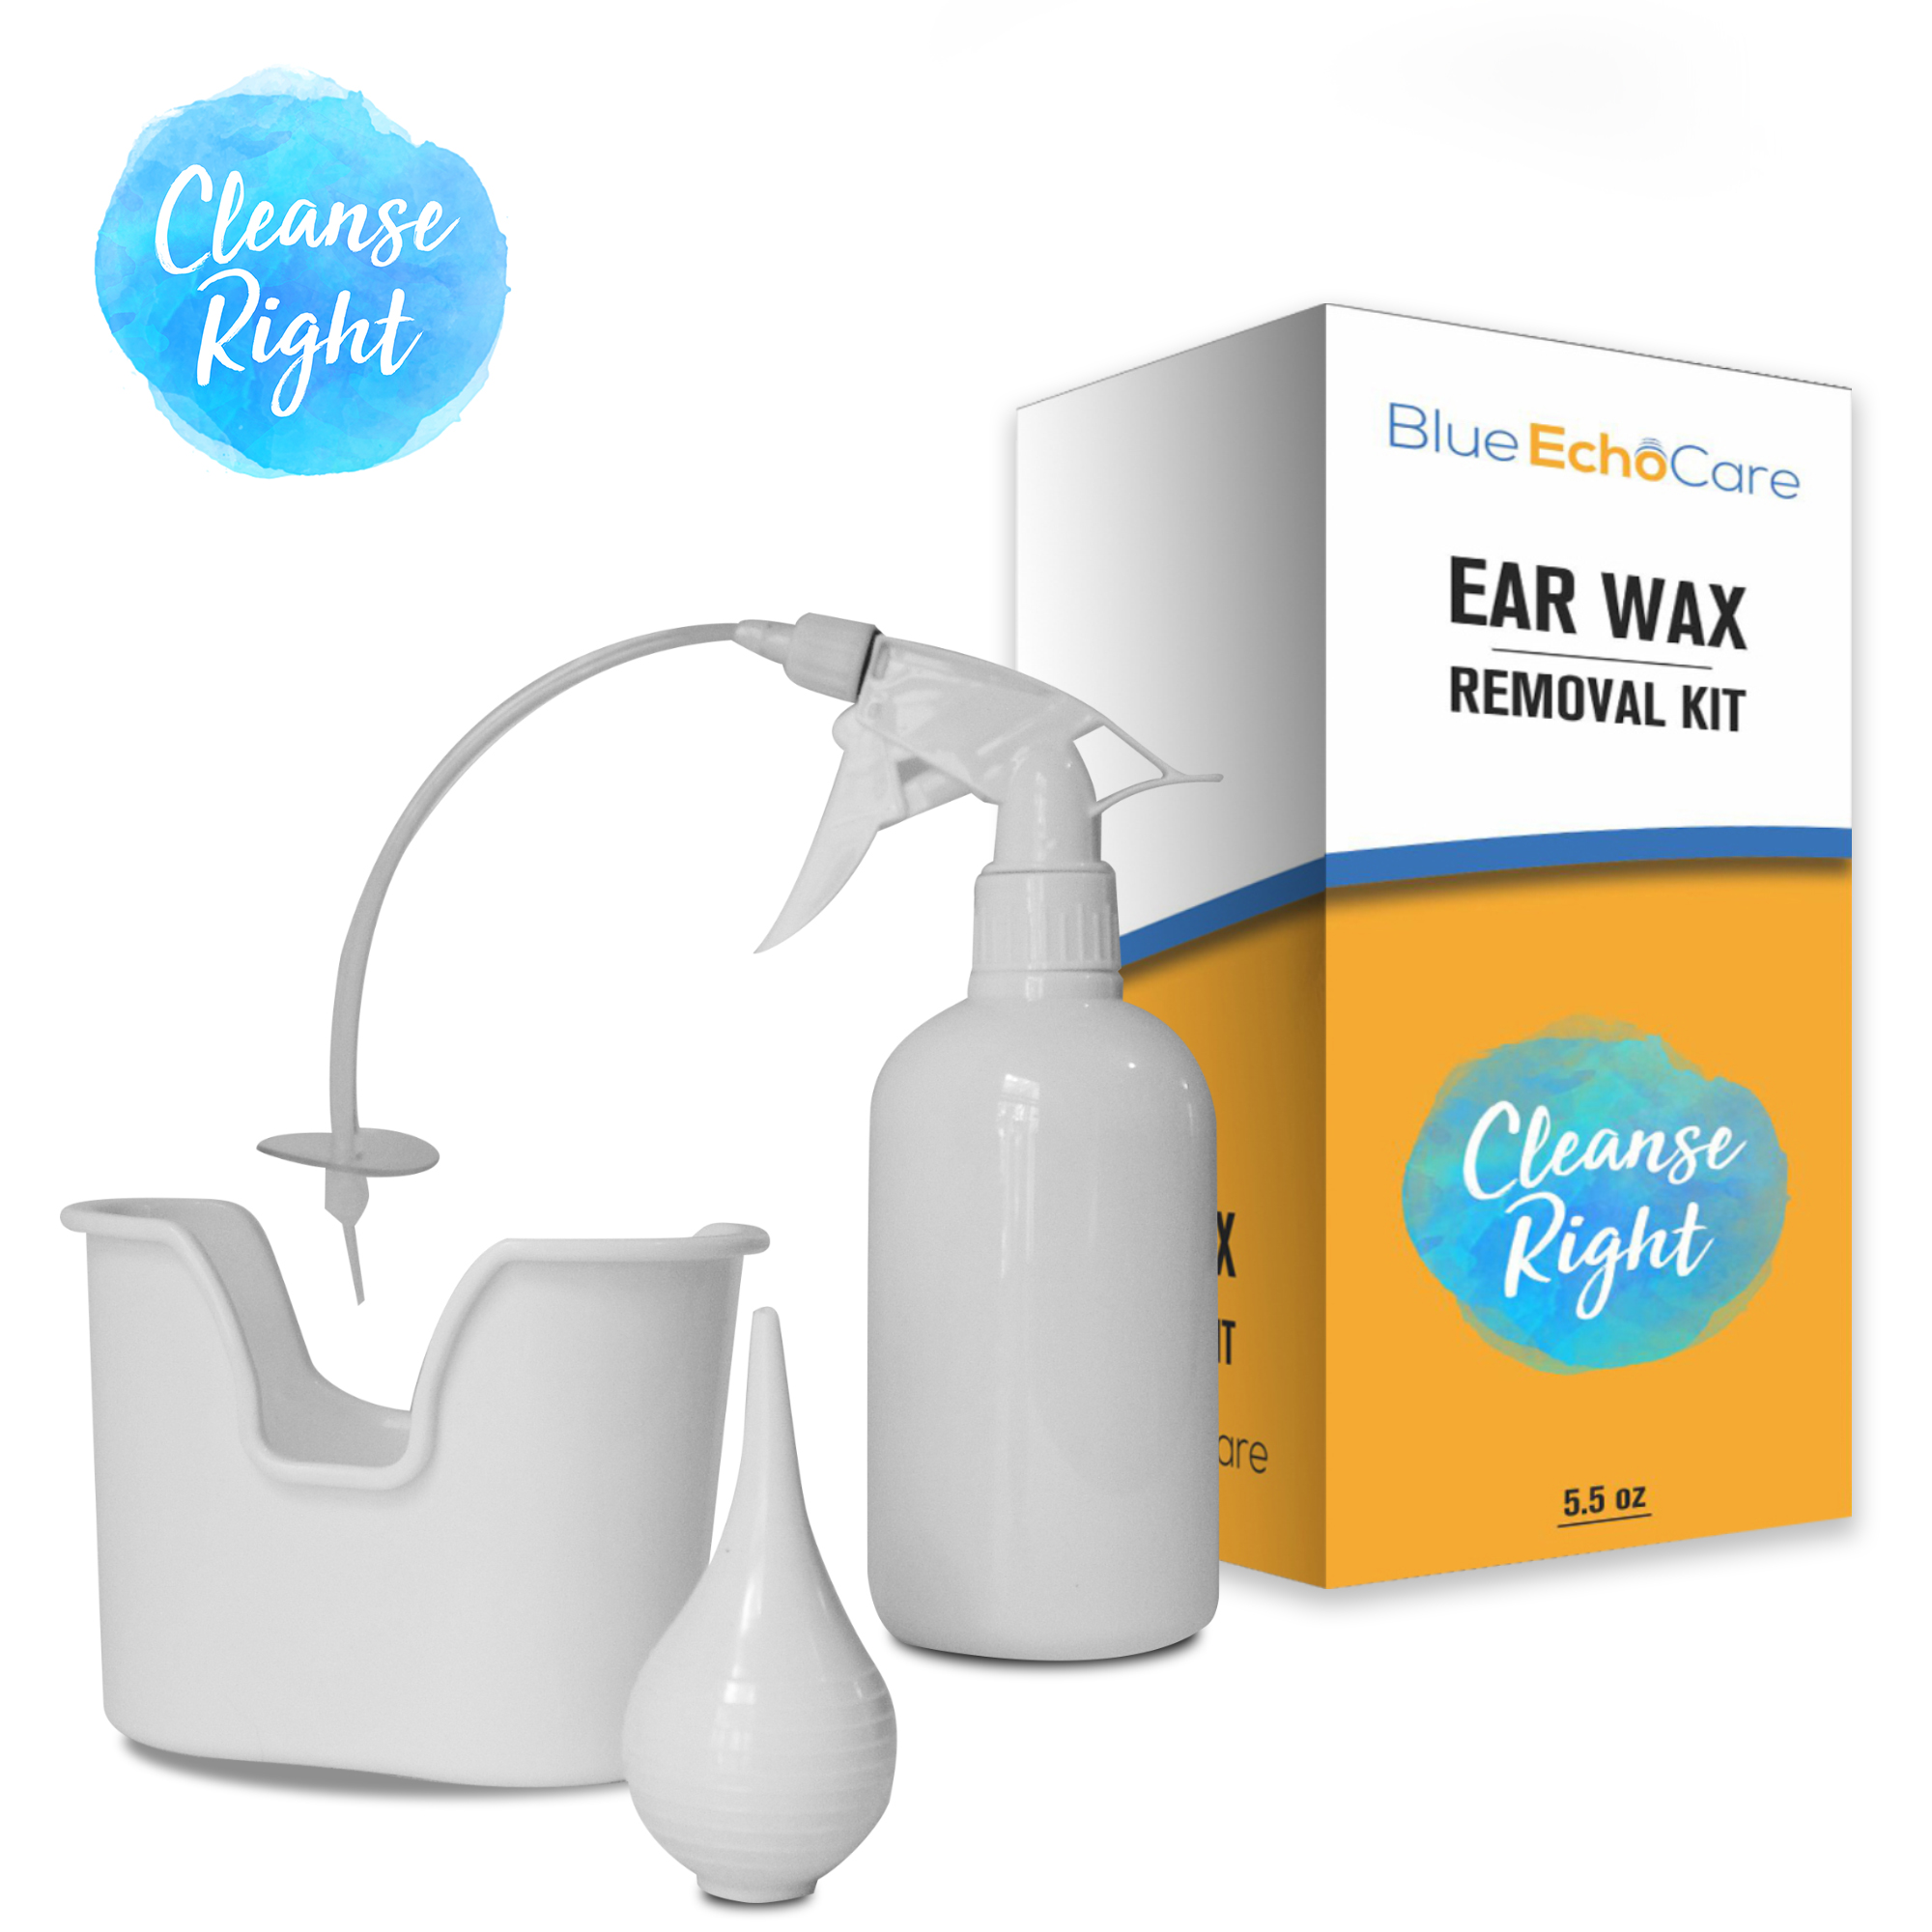 New Model! Ear Wax Removal Kit with USA MADE, Reusable, Dishwasher Friendly  TIPS! Ear Spiral, Basin and Rubber Bulb Syringe